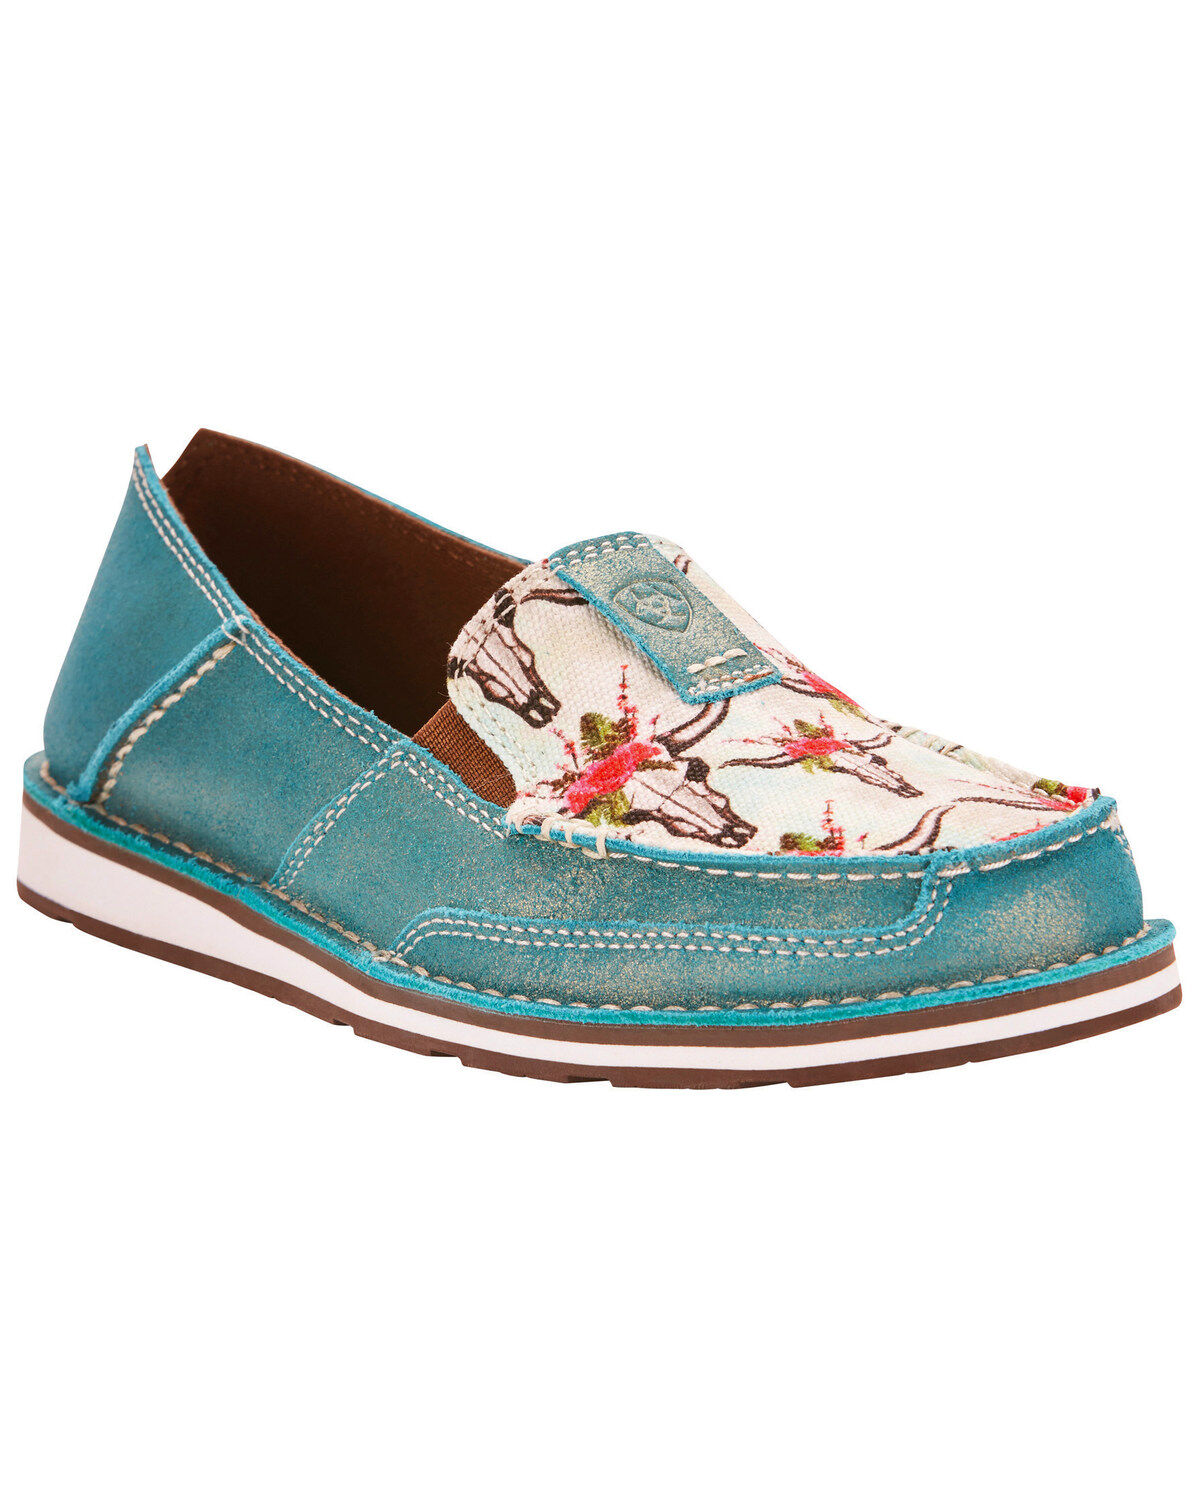 womens western slip on shoes